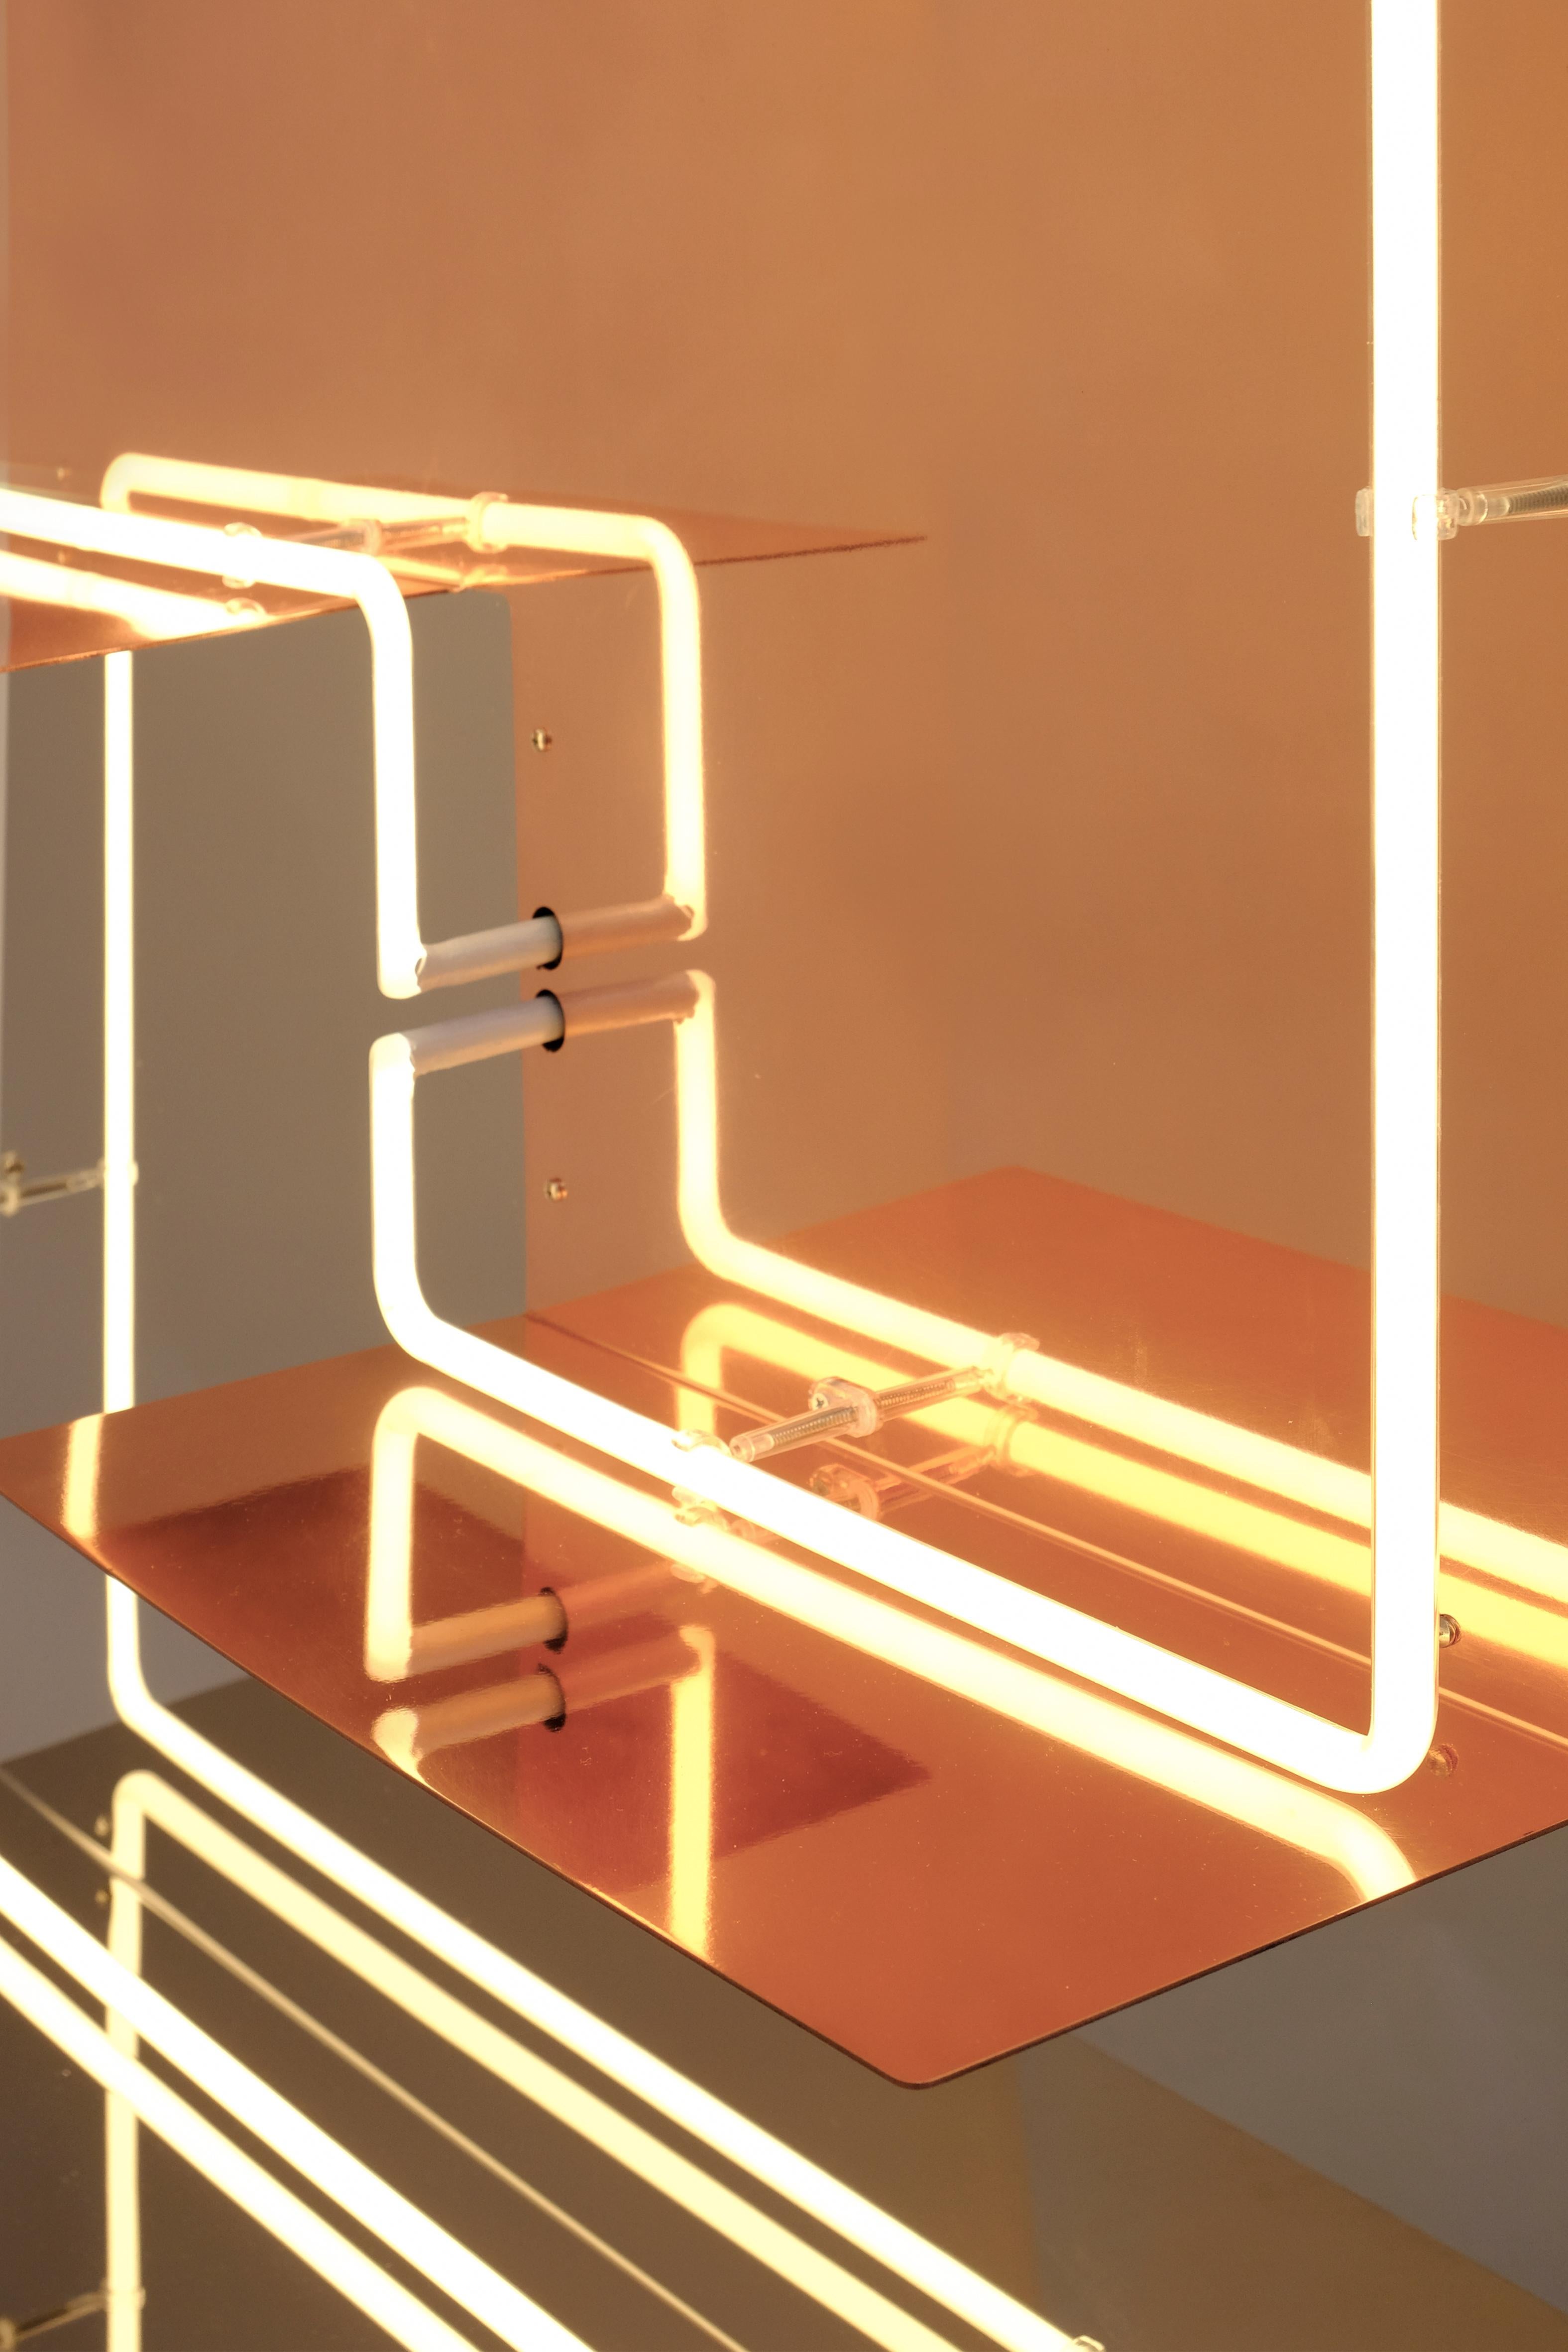 Quadri Luminosi' or 'Bright artworks' is a limited edition of supermirror shelves with a luminous graphic design which runs around it. The metal materials, stainless steel supermirror and polished copper reflect the ambience in which they are hung,